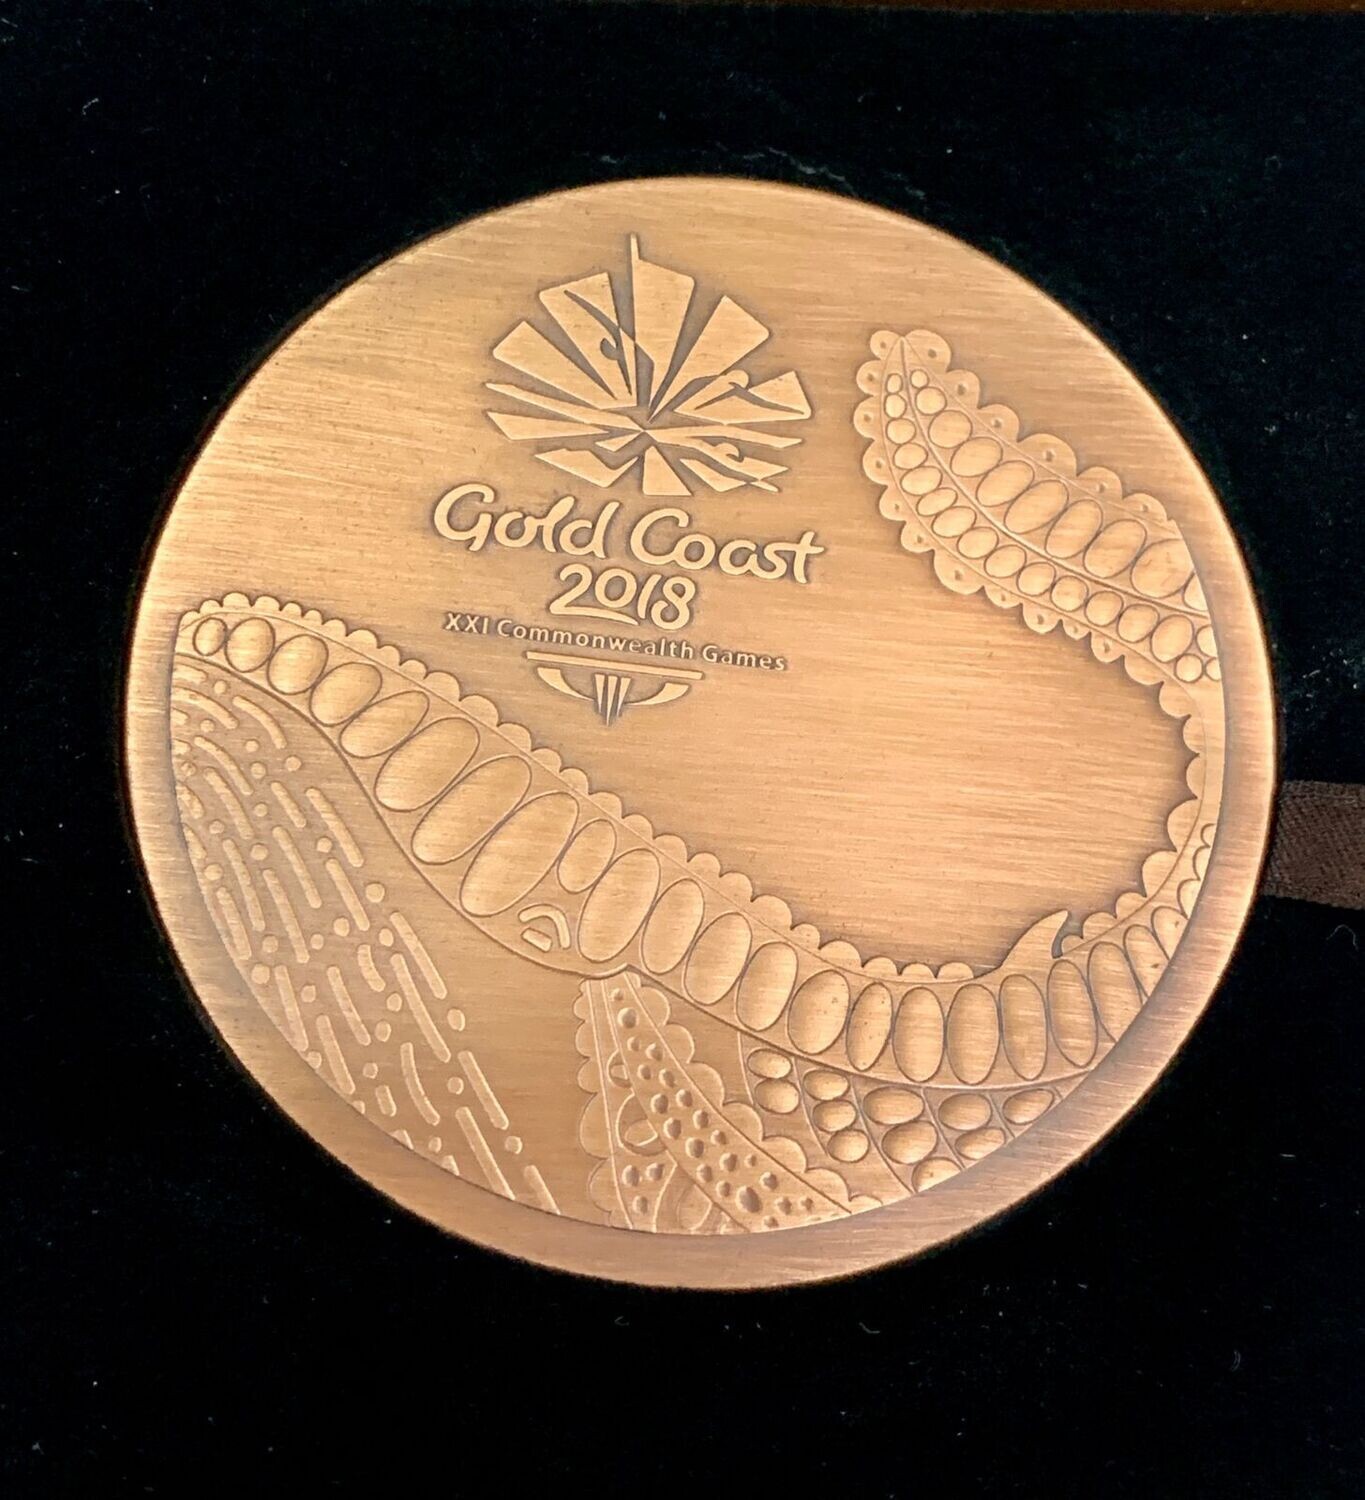 XXI Commonwealth Games 2018 Commemorative Medal